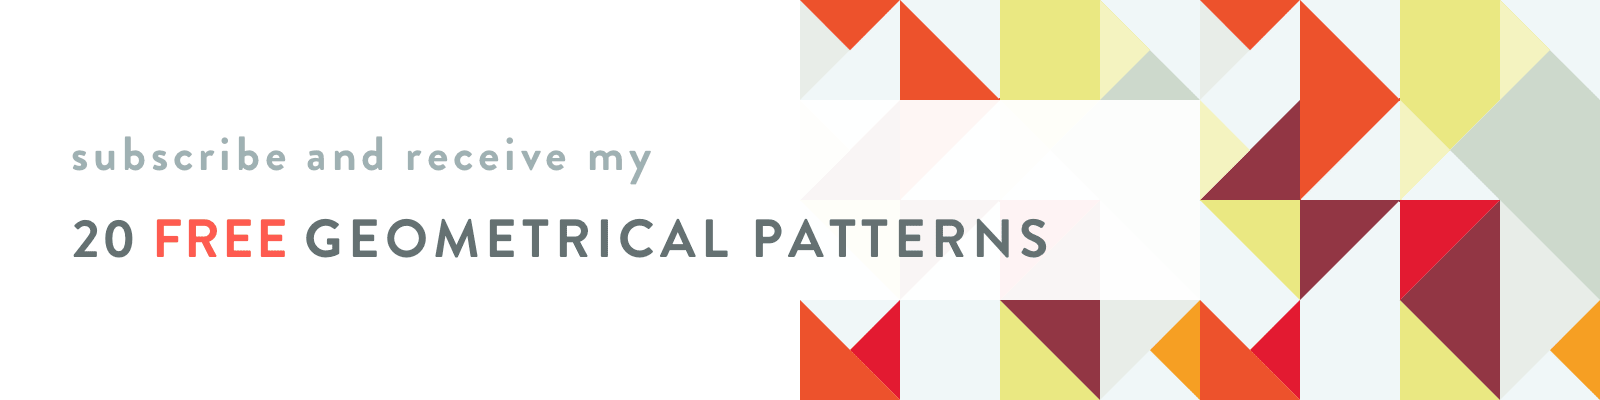 subscribe and receive my 20 FREE geometrical patterns